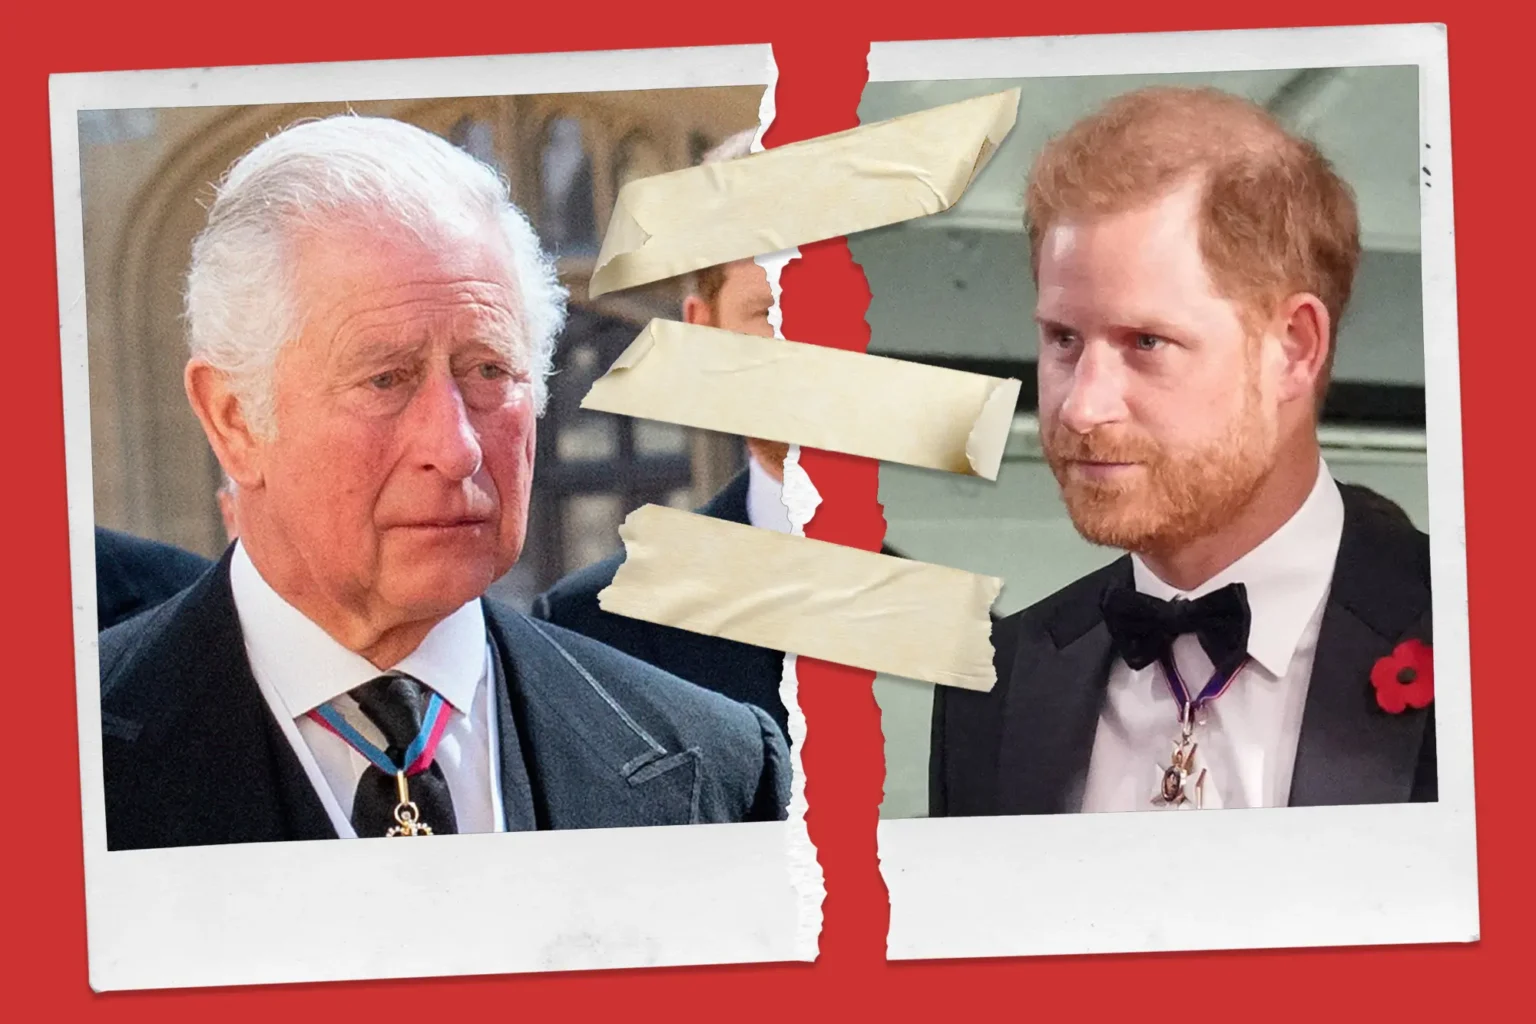 prince-harry-extended-his-hands-to-the-royal-family-to-end-the-rift